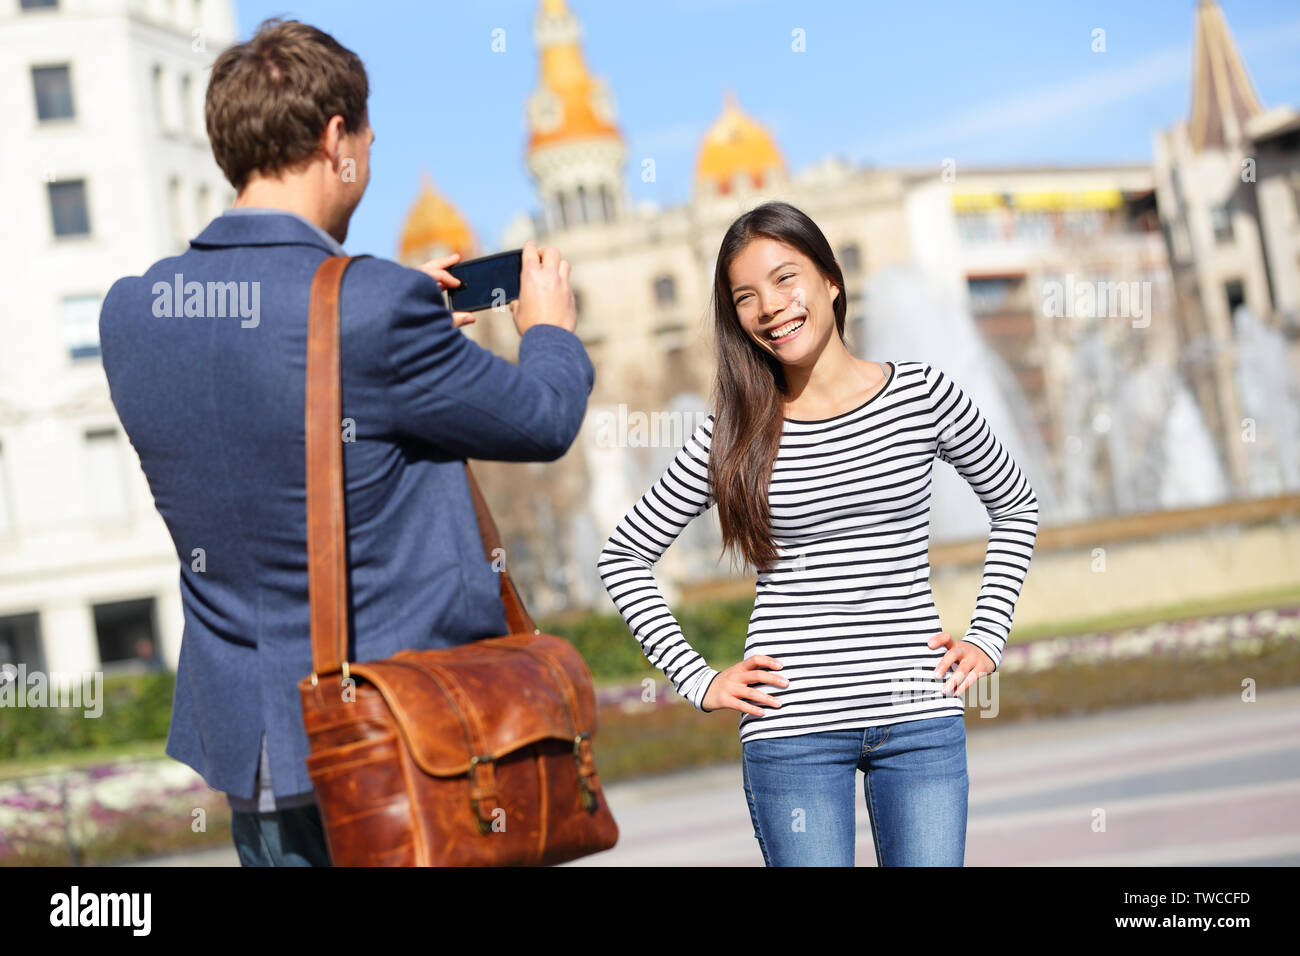 Tourists taking picture on travel in Barcelona. Happy urban young couple taking photo portrait with smart phone camera. Man and woman on Placa de Catalunya, Catalonia Square, Barcelona, Spain. Stock Photo